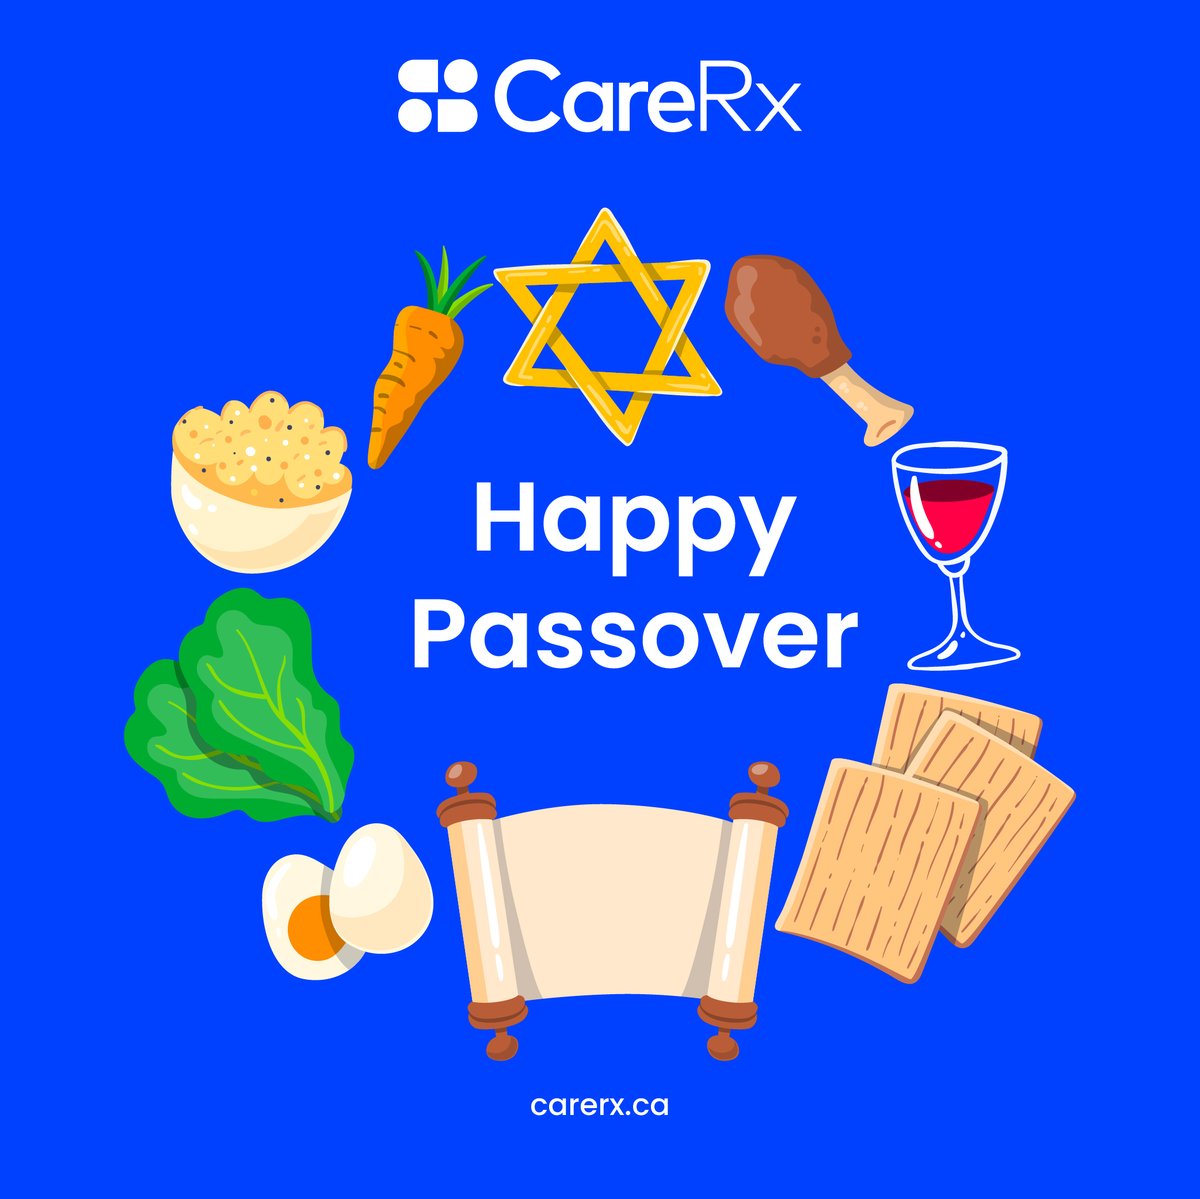 CareRx wishes Happy Passover to those celebrating. May this Passover bring peace, prosperity, and joy to you and your family. #HappyPassover #CareRx